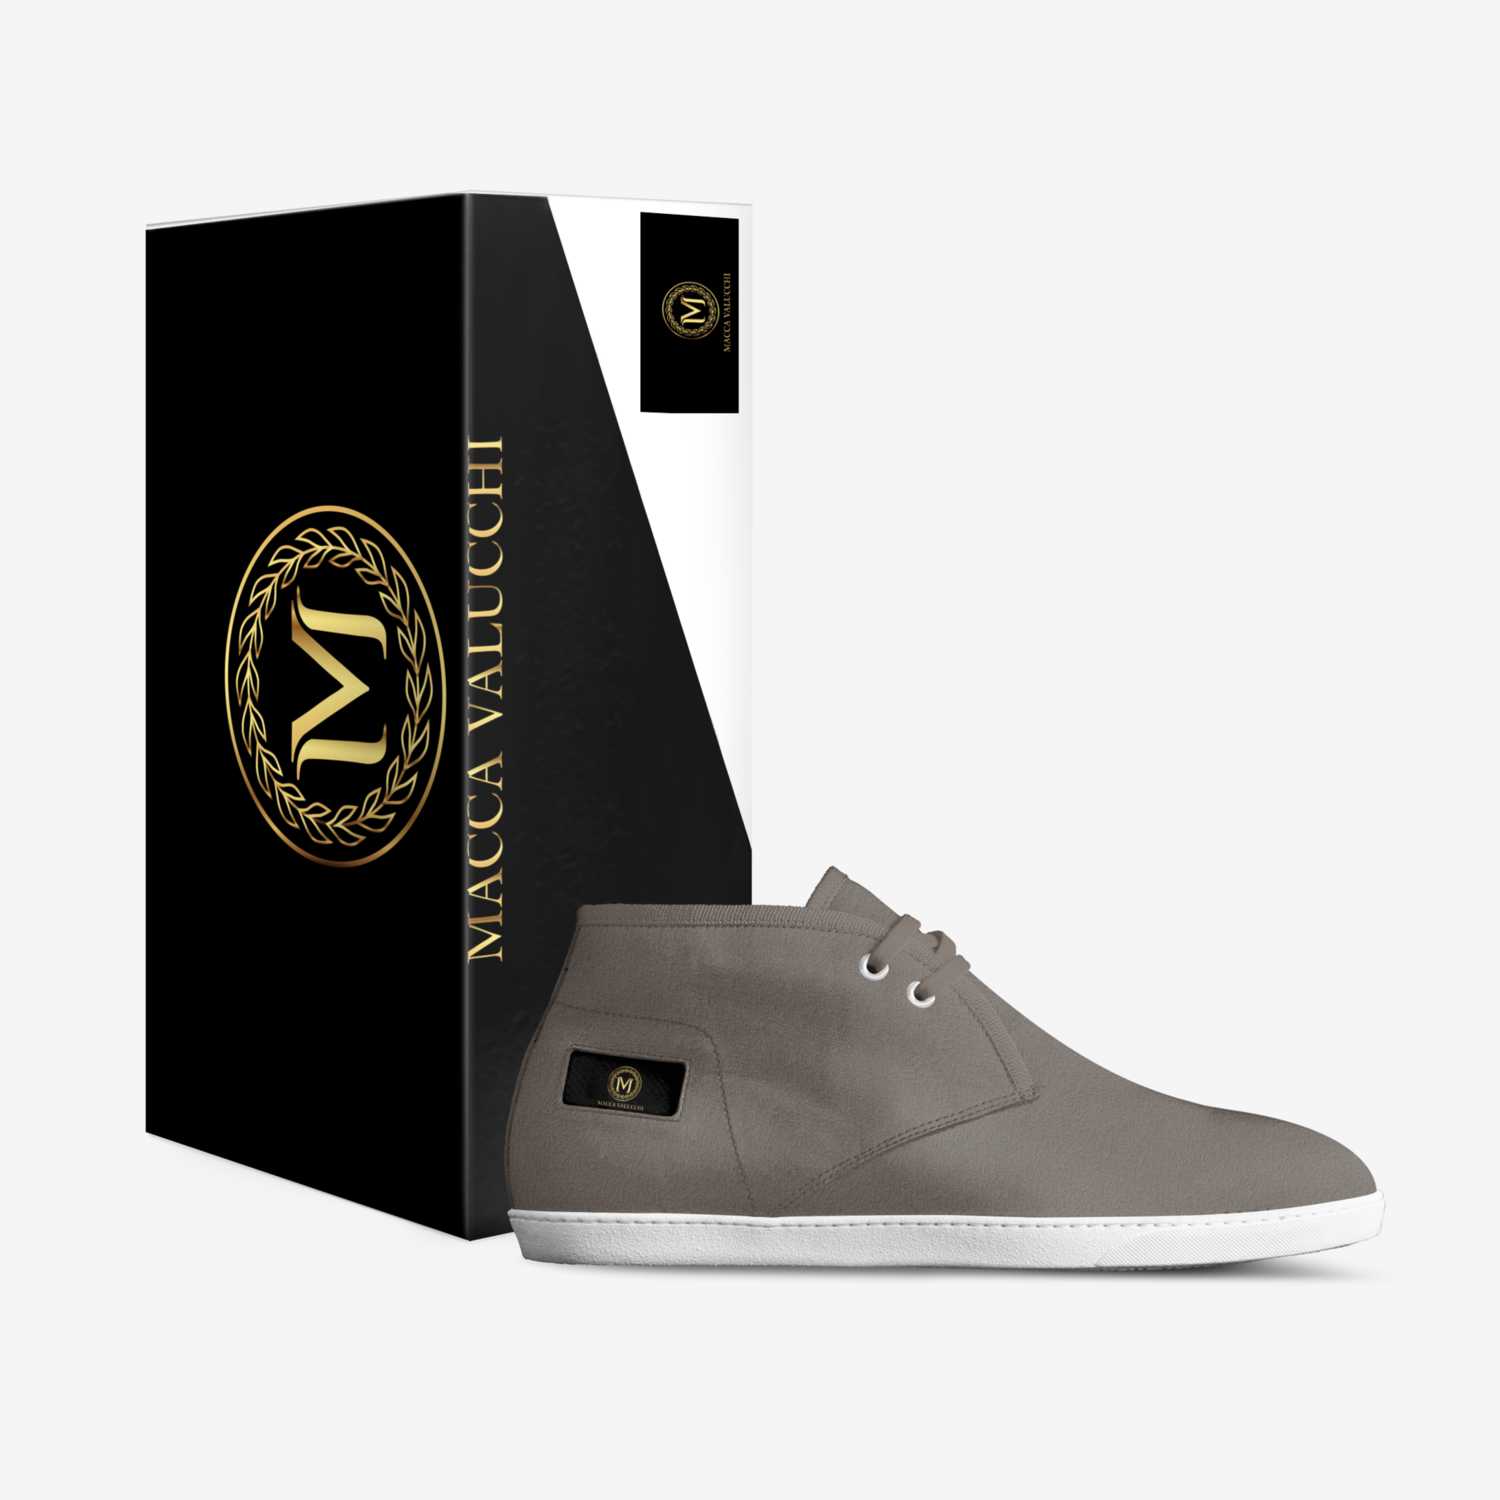 MV custom made in Italy shoes by M M | Box view